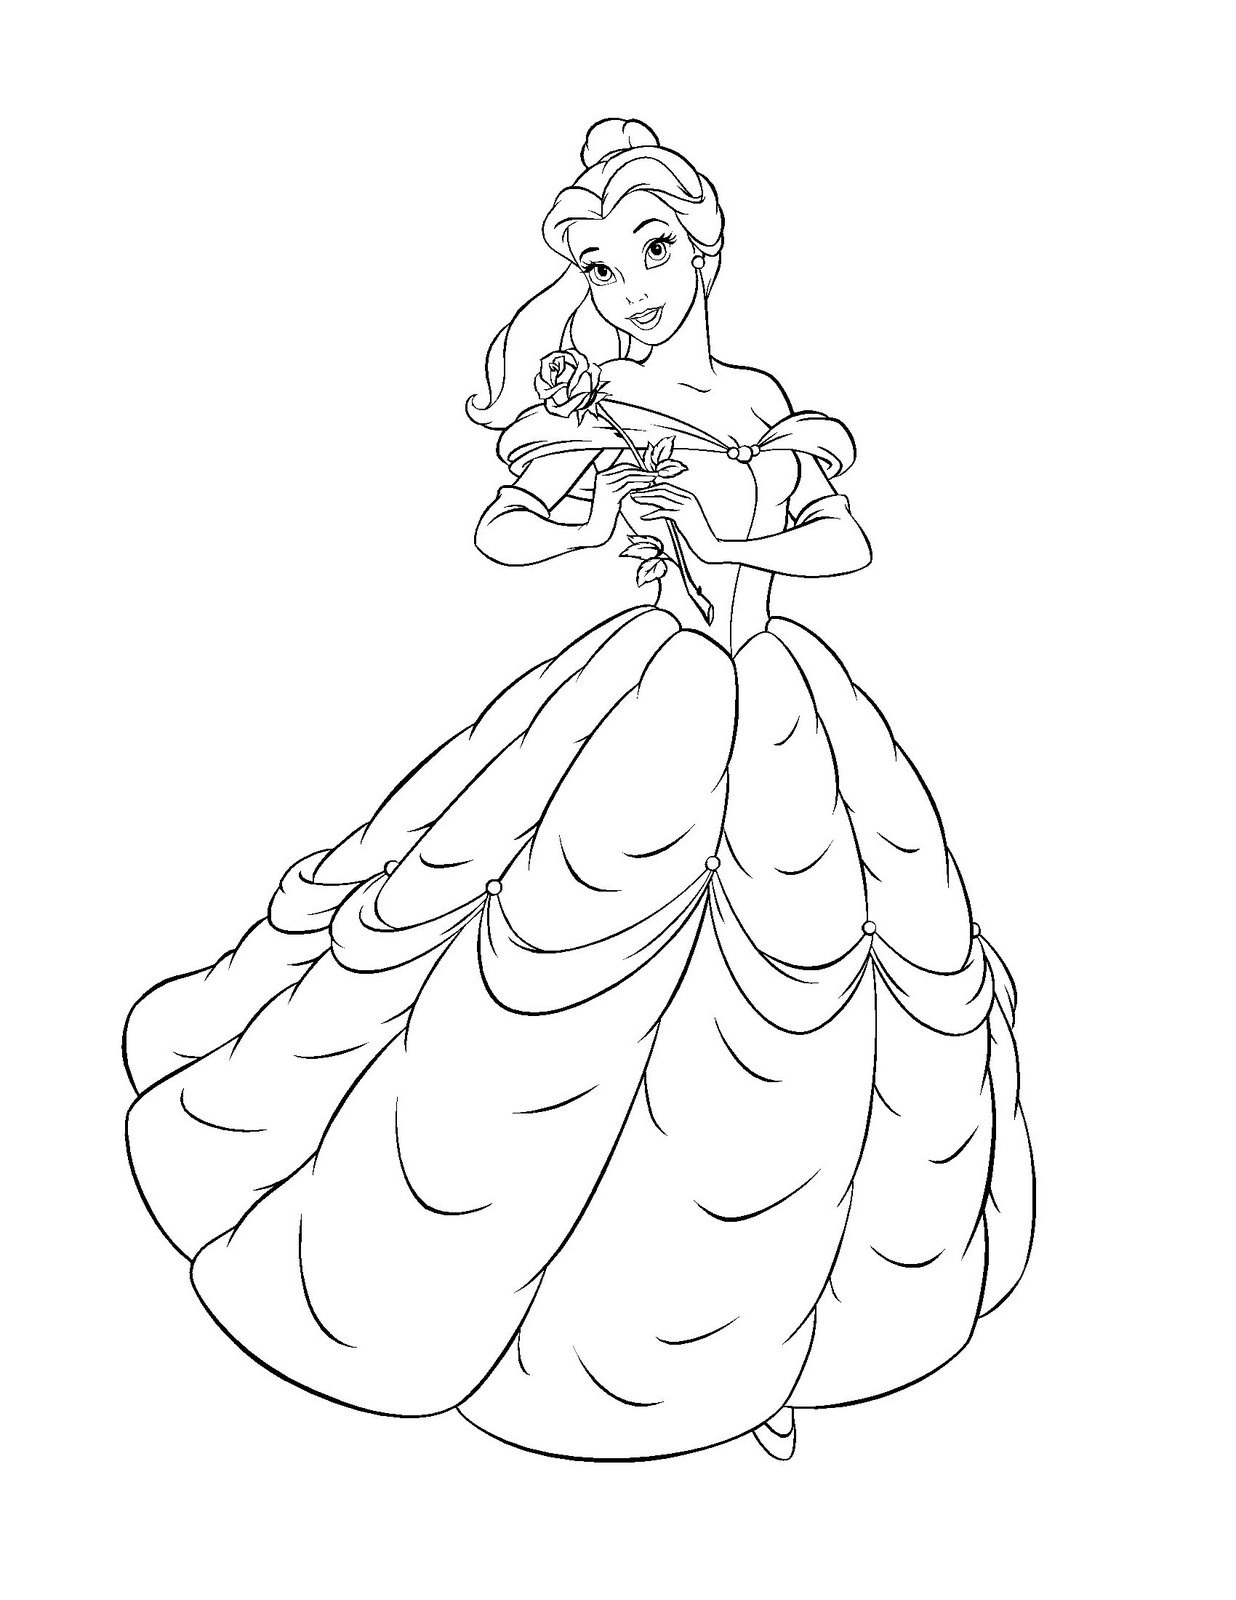 Disney Princess Coloring Pages Belle at GetColorings.com | Free